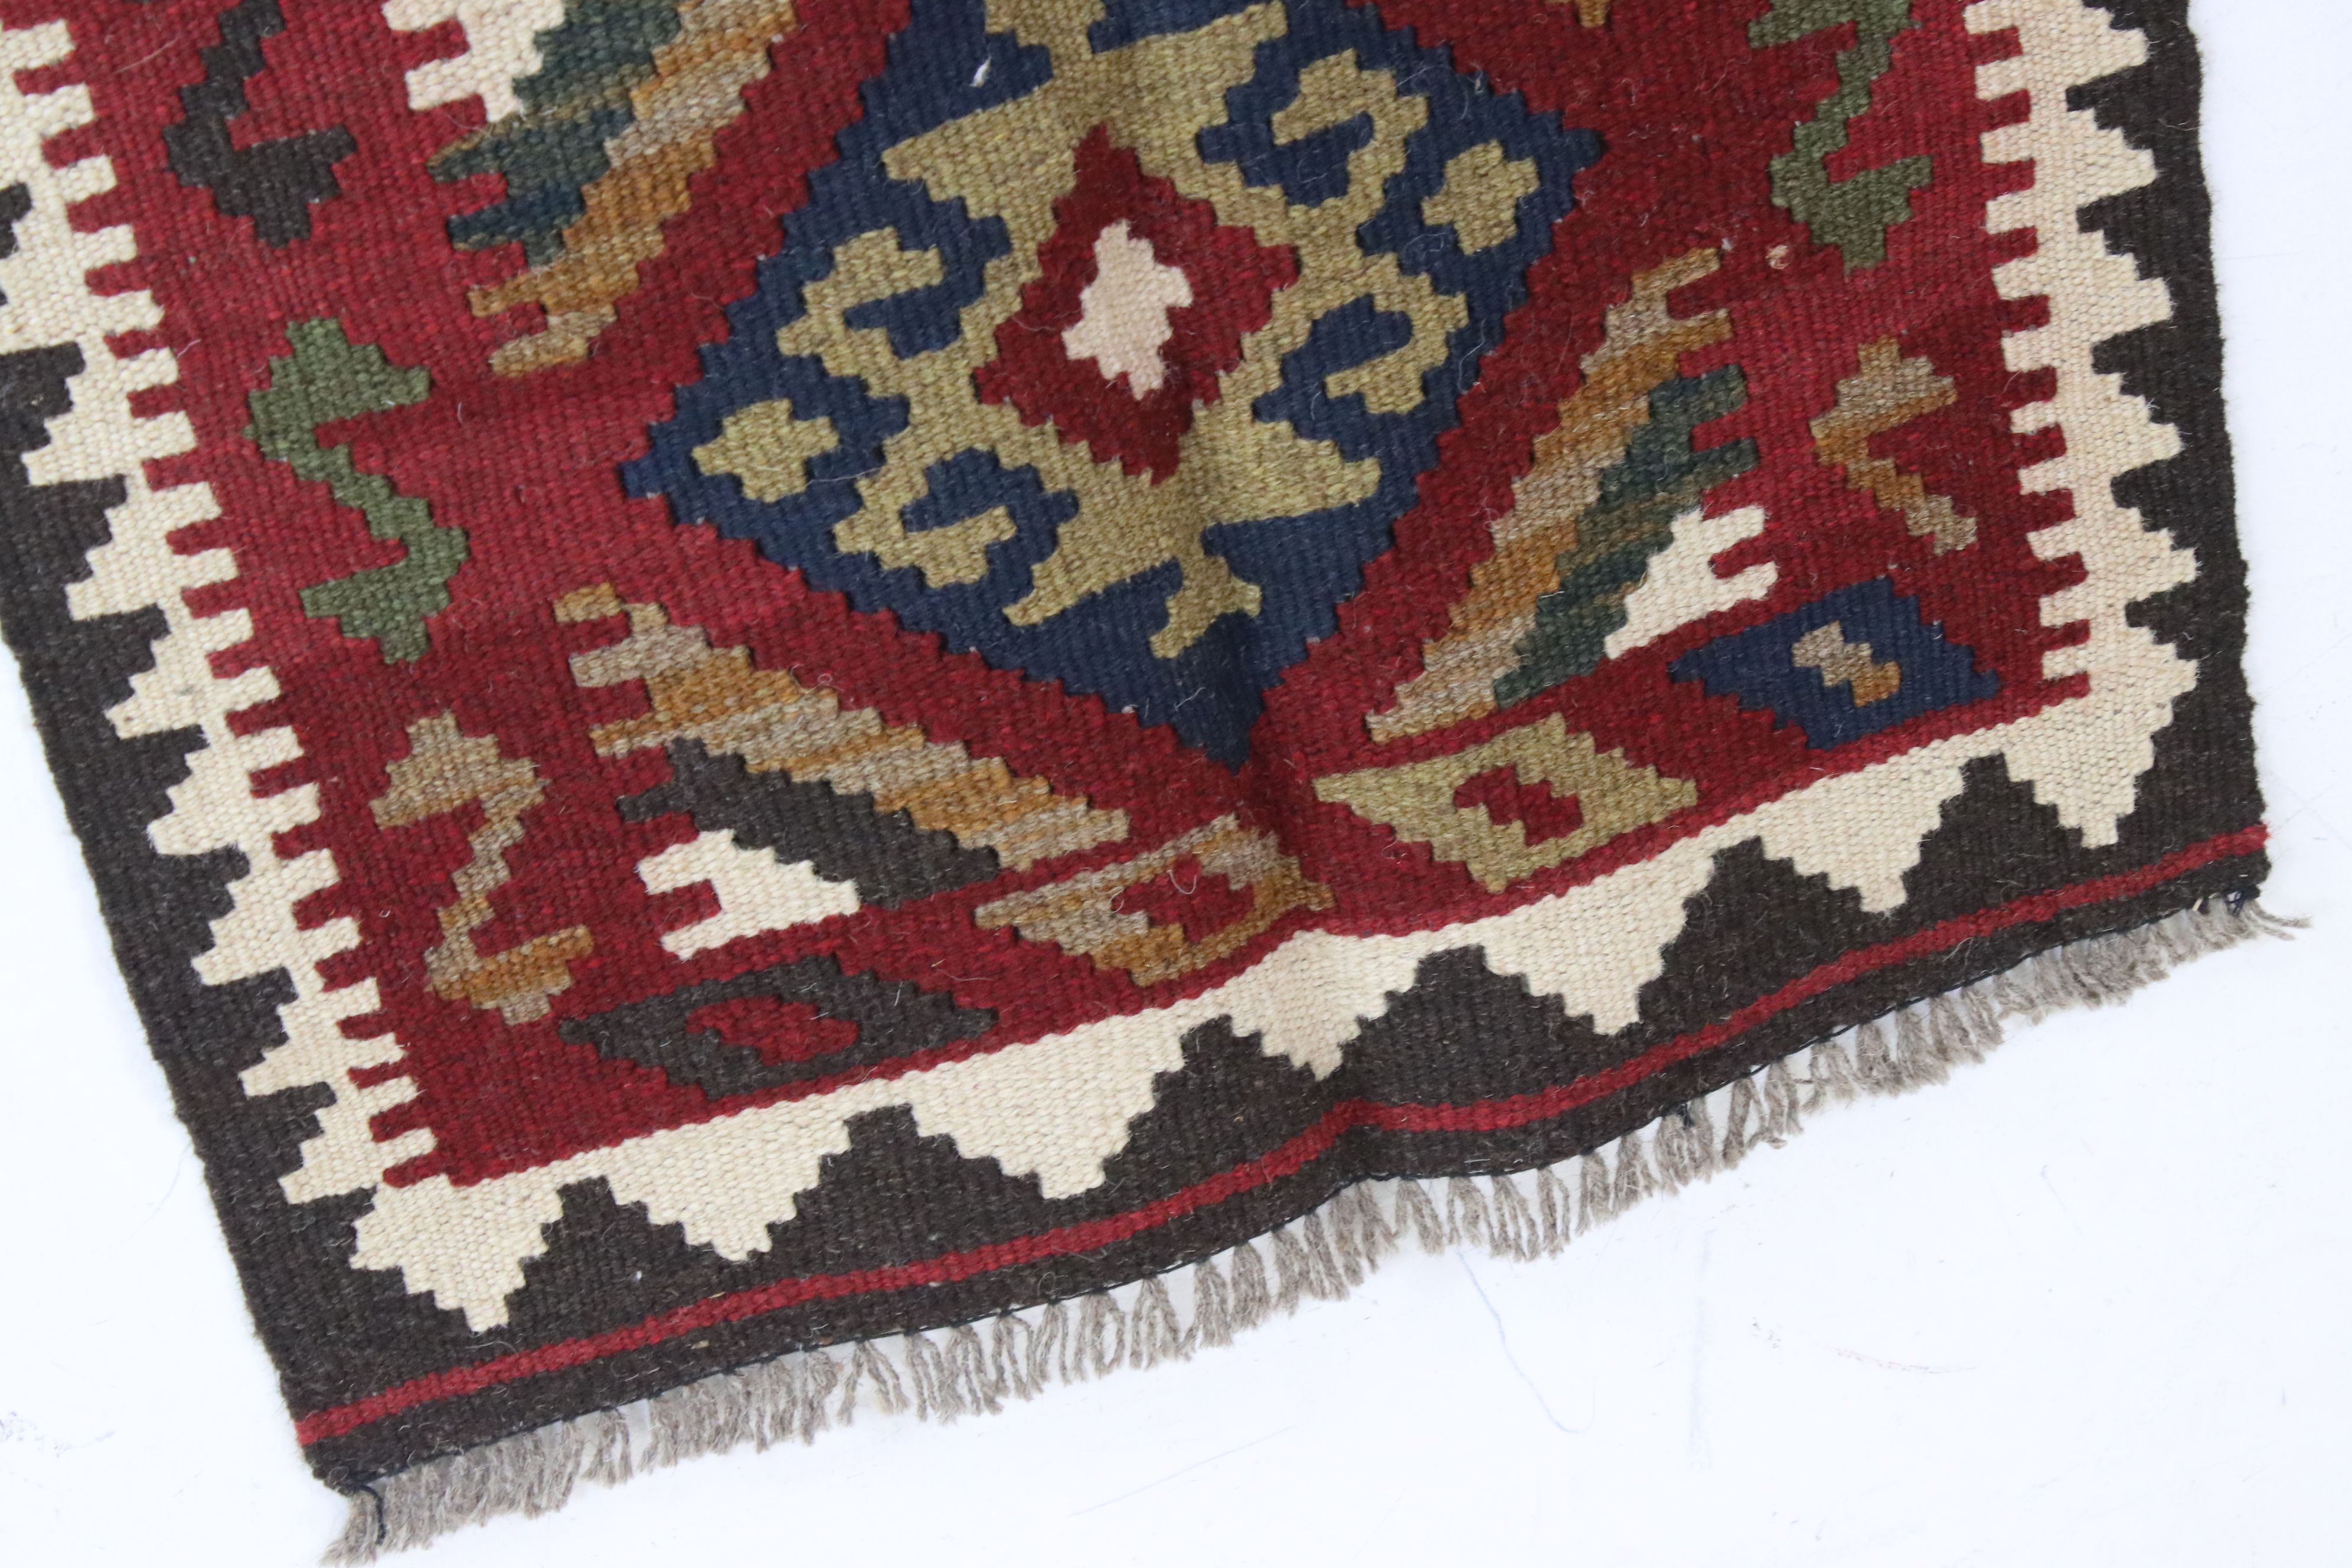 Hand Knotted Woolen Maimana Kilim Rug, 77cms x 57cms - Image 2 of 3